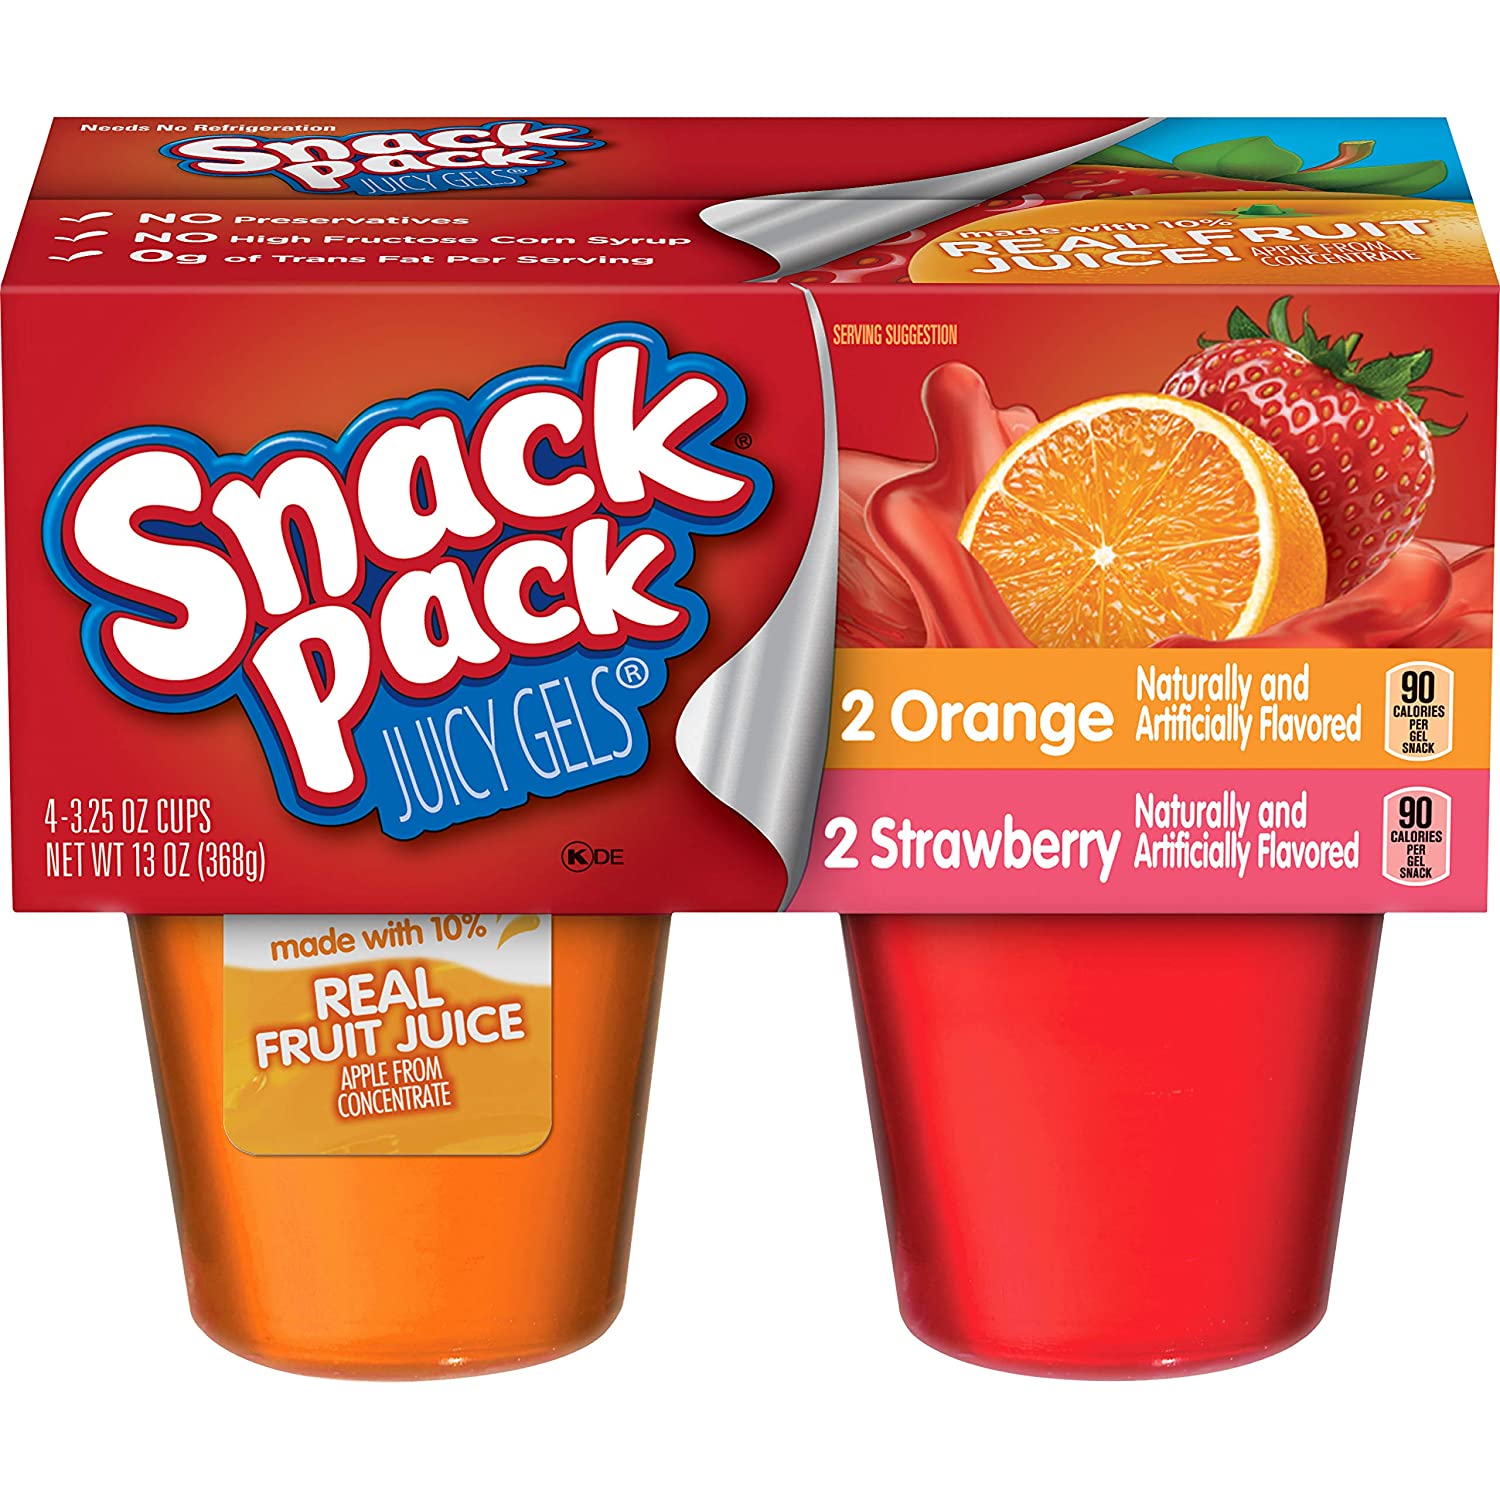 4-Count 3.25-Oz Cups Snack Pack Juicy Gels Strawberry & Orange 4 for $4.50 (16 Total Cups - $1.12 each pack) w/ S&S + Free Shipping w/ Prime or on orders $25+